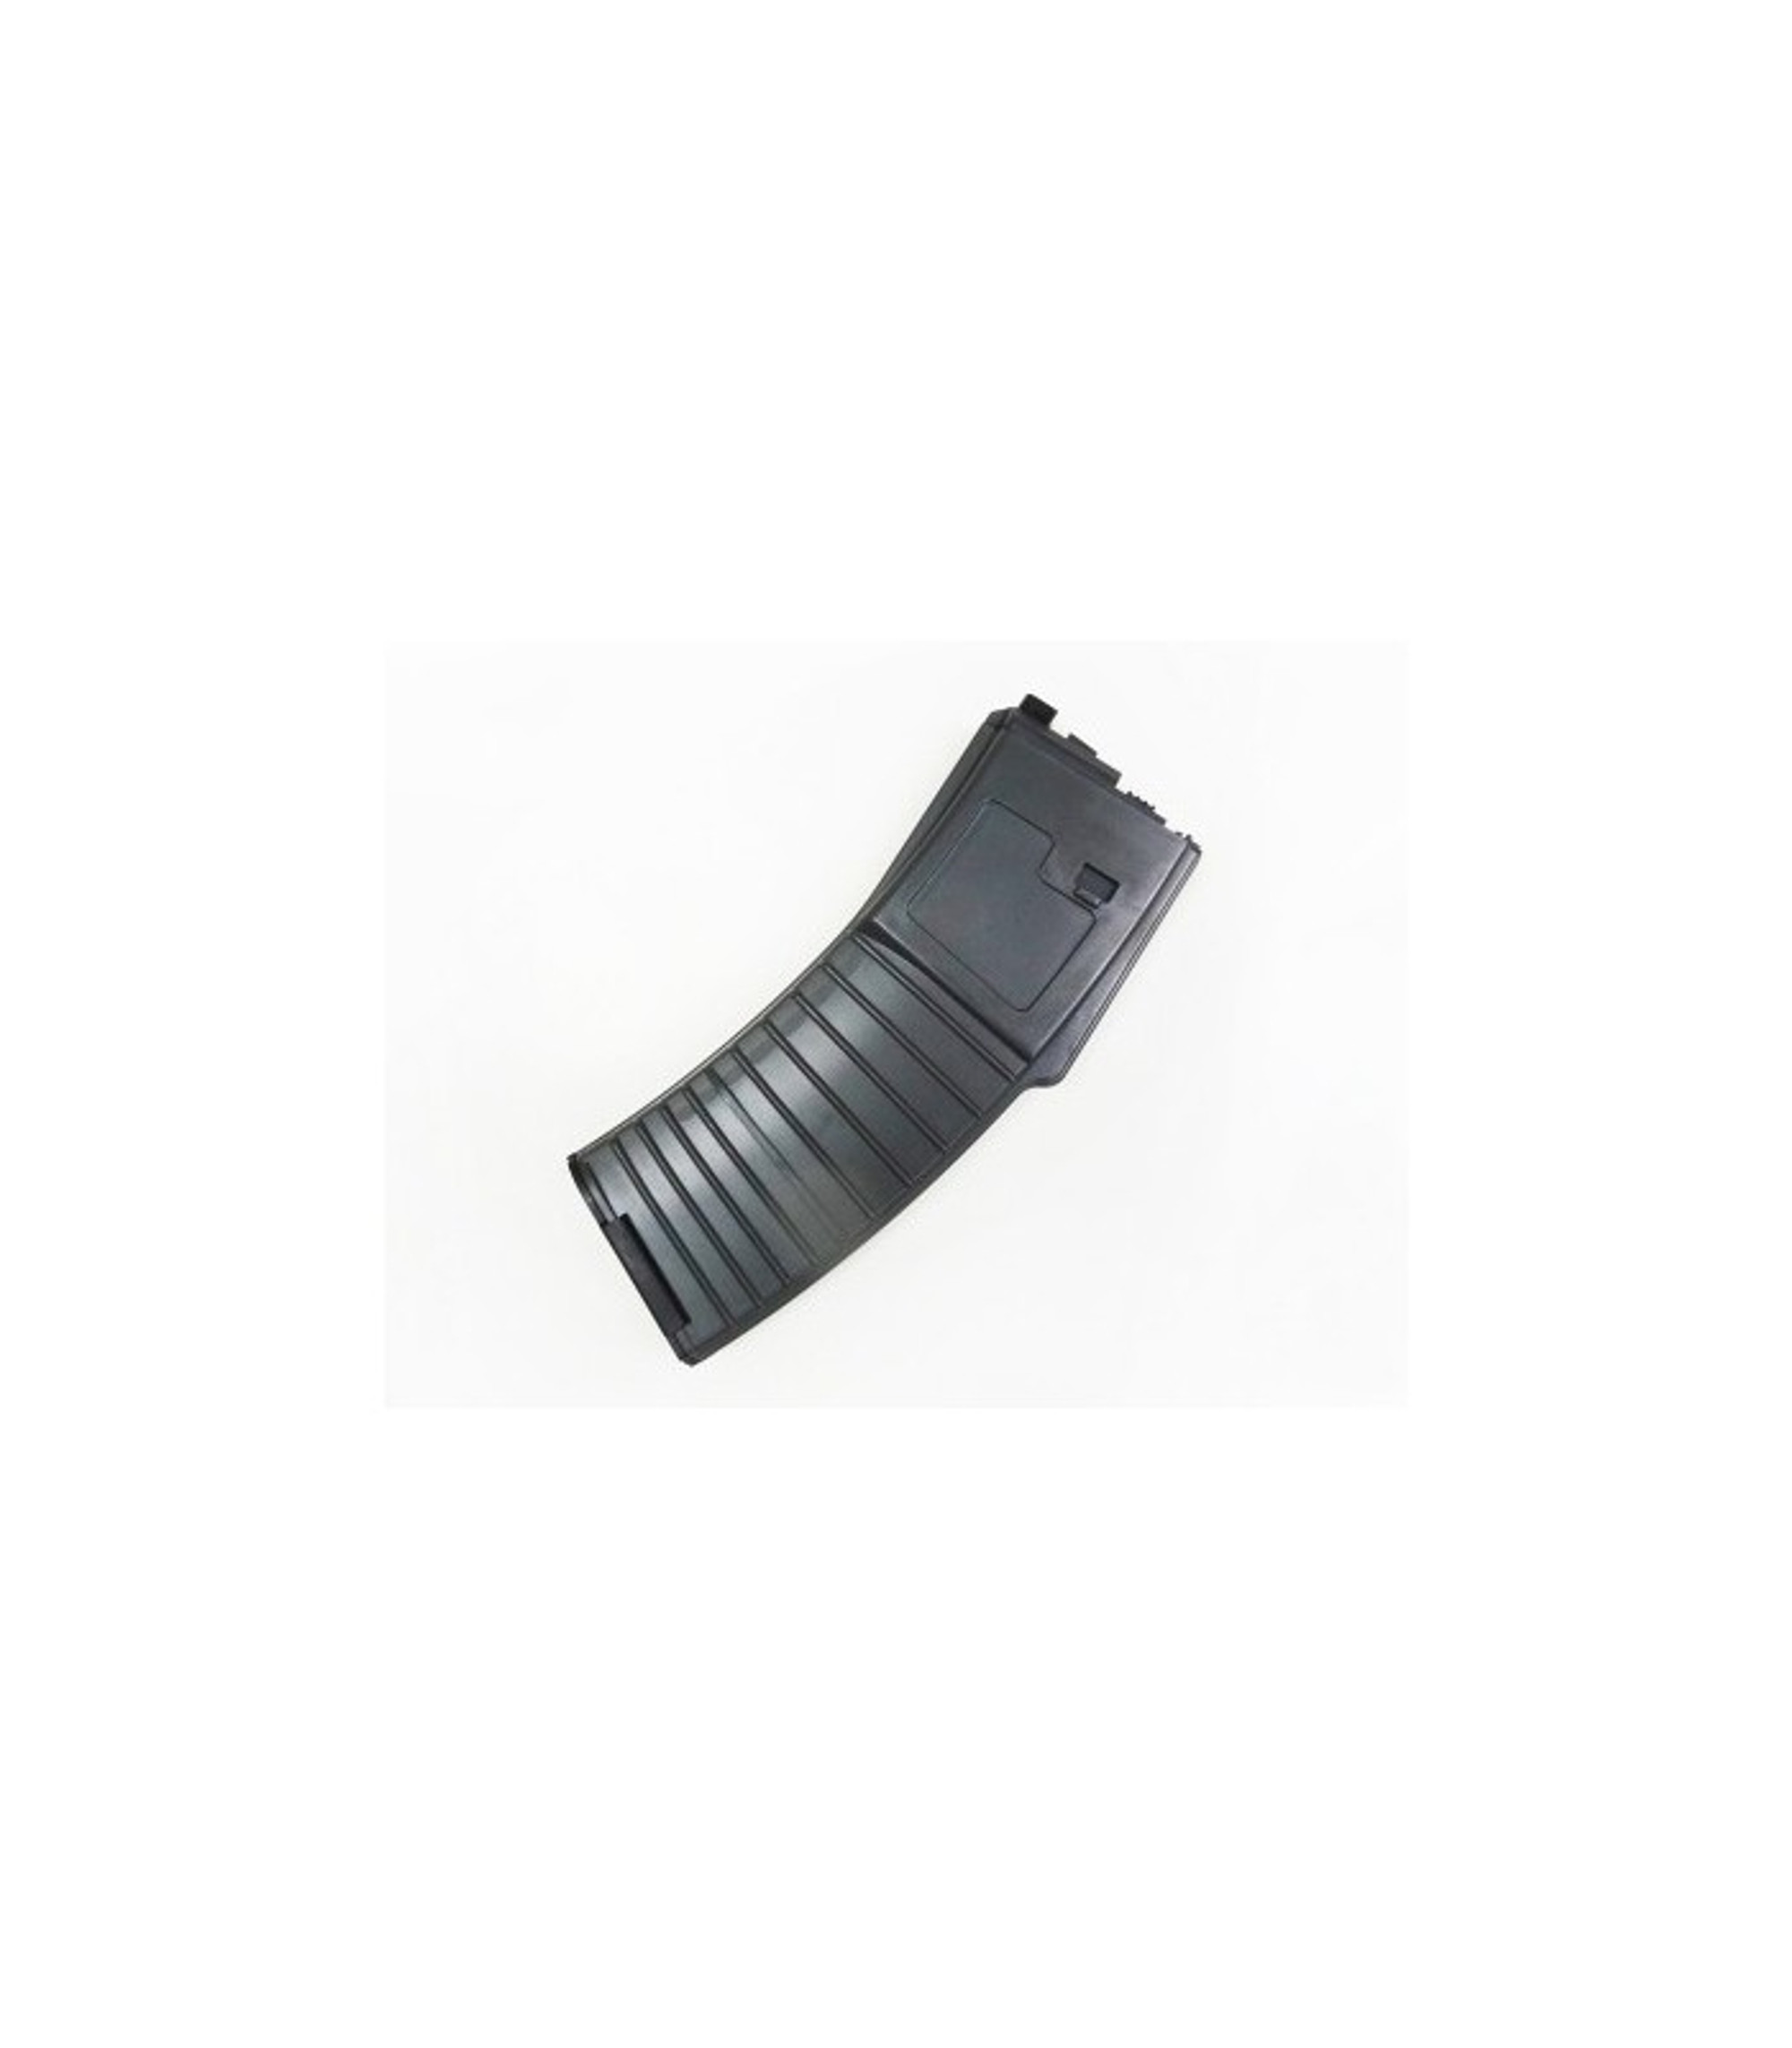 WE - 30 Rds Magazine for PDW Open Bolt System